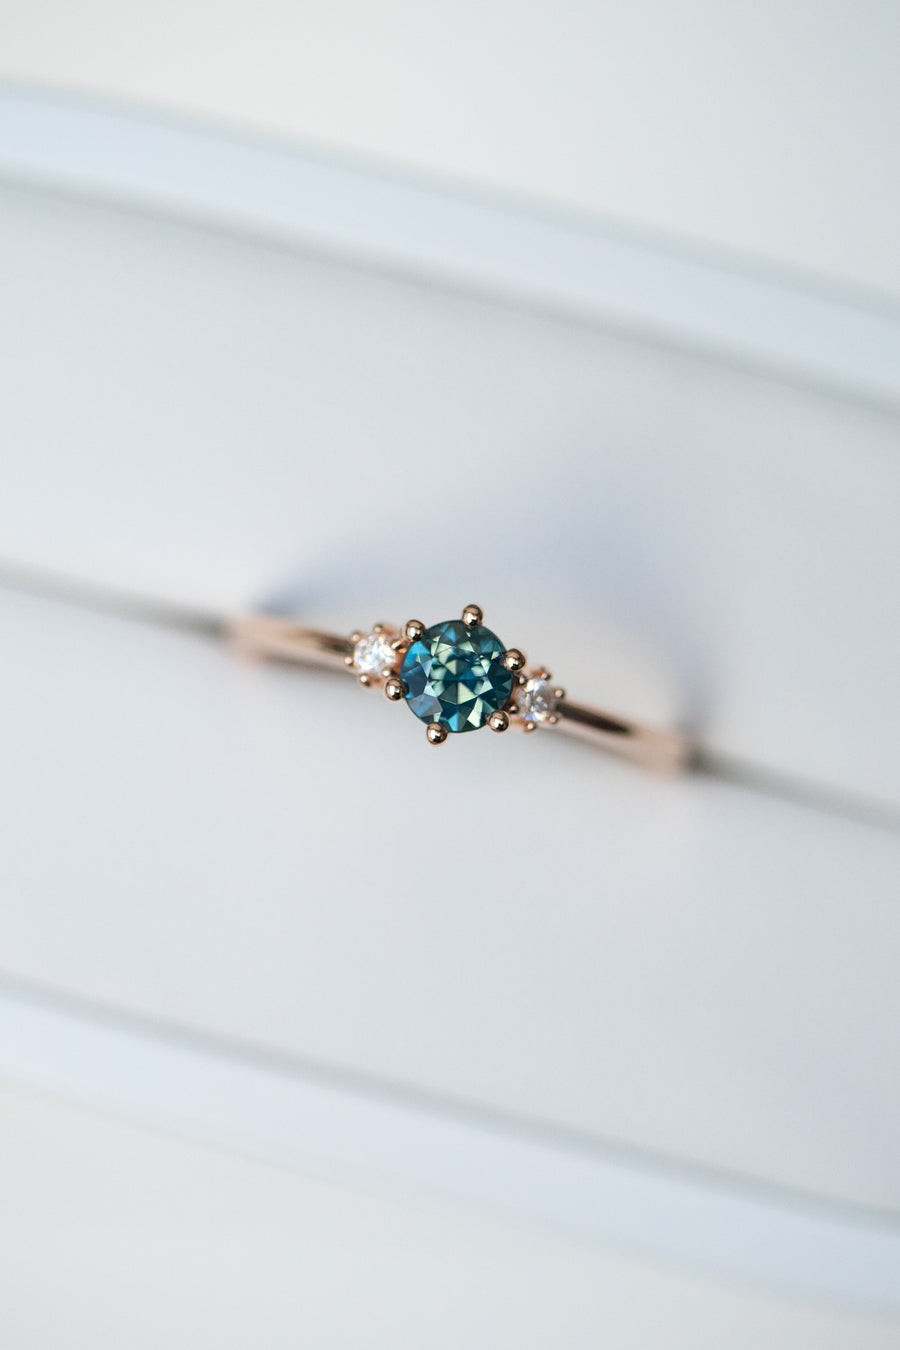 LIMITED DISCOUNT (3 SETS ONLY) ~0.30carat Natural Teal Sapphire & total 0.04carat Diamond 18K with ~total 0.17carat Diamond Stacking Ring